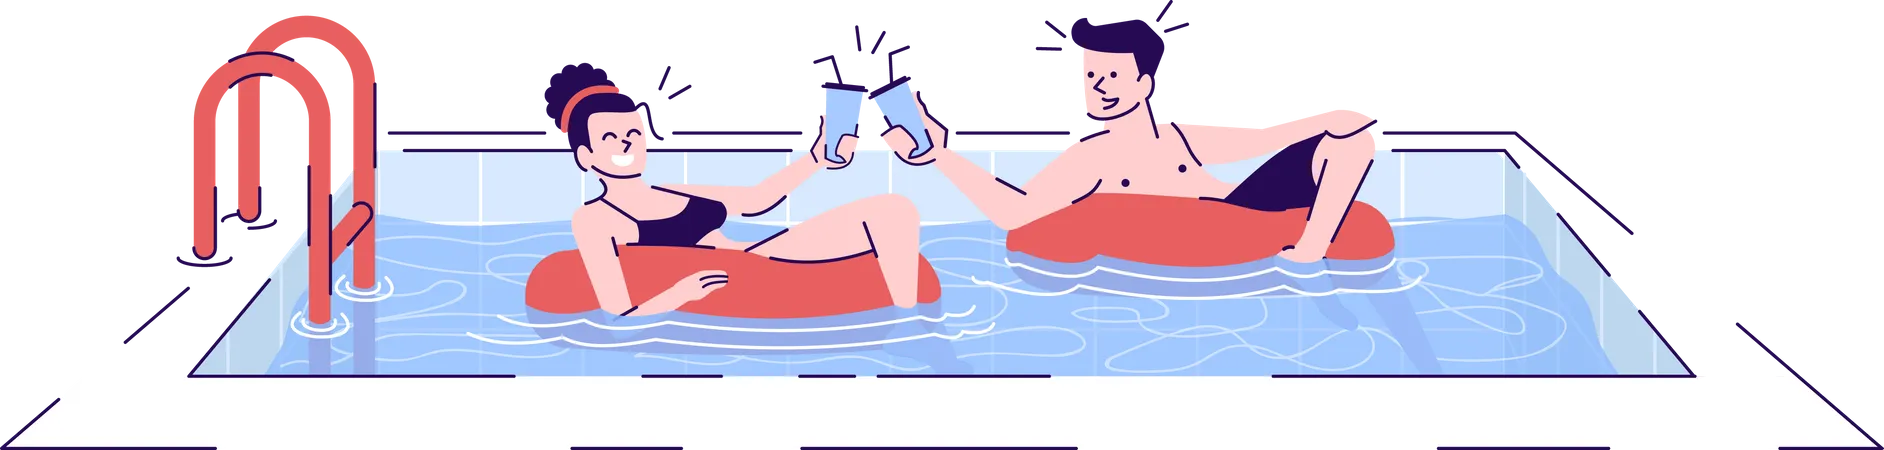 Couple In Swimming Pool Flat Vector Illustration Romantic Date In Water Boyfriend Girlfriend Drinking Cocktail In Safety Rings Isolated Cartoon Characters With Outline Elements On White Background Illustration